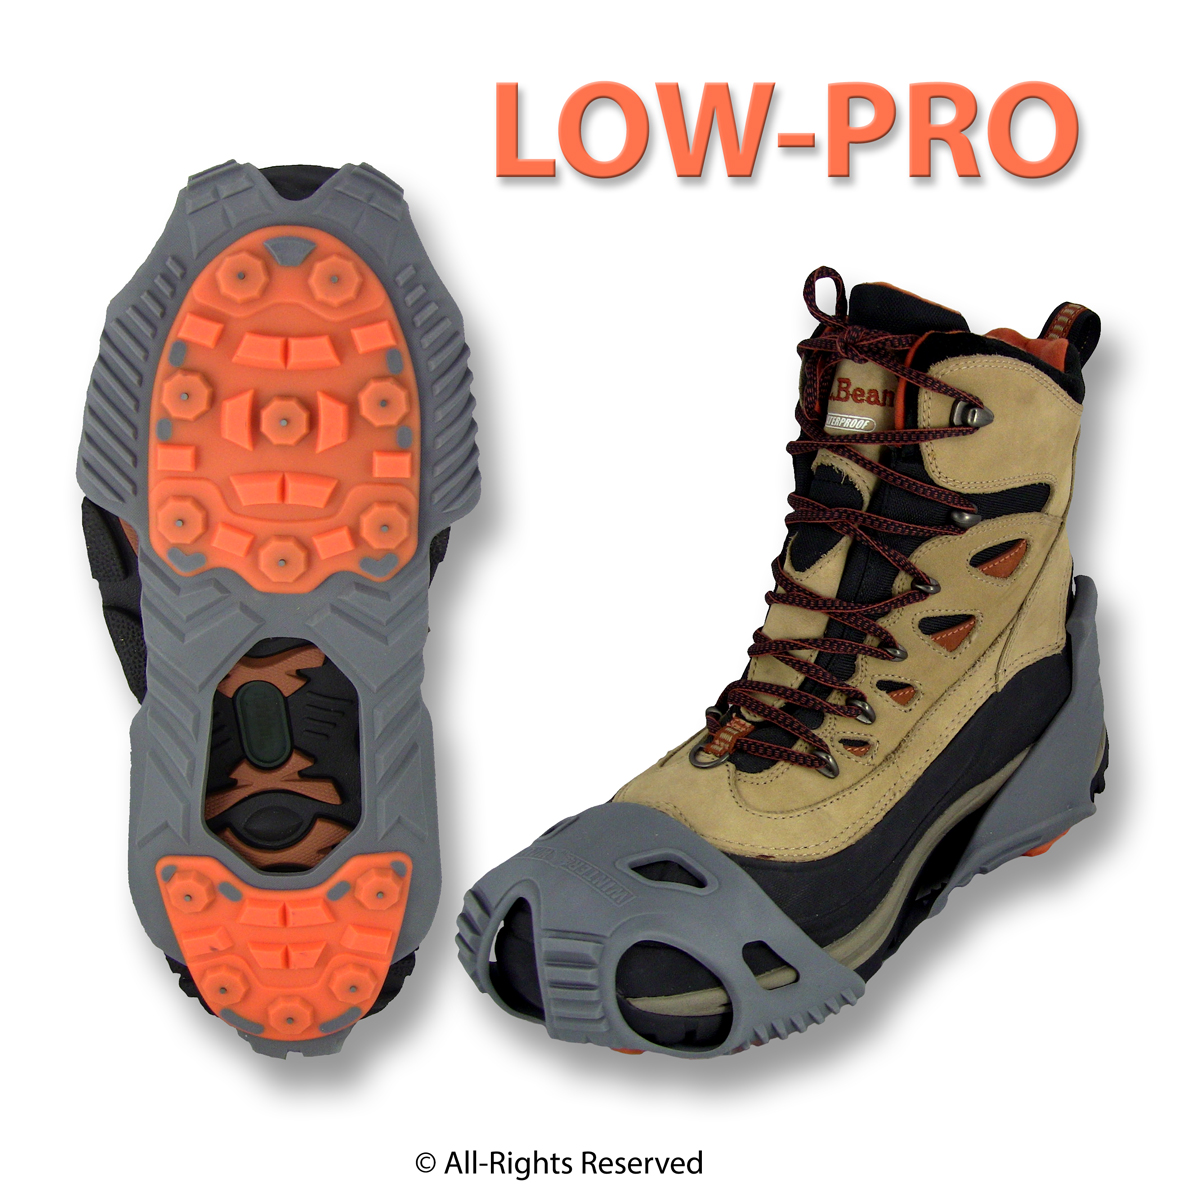 Winter Walking LOW-PRO® Ice Cleats for Boots